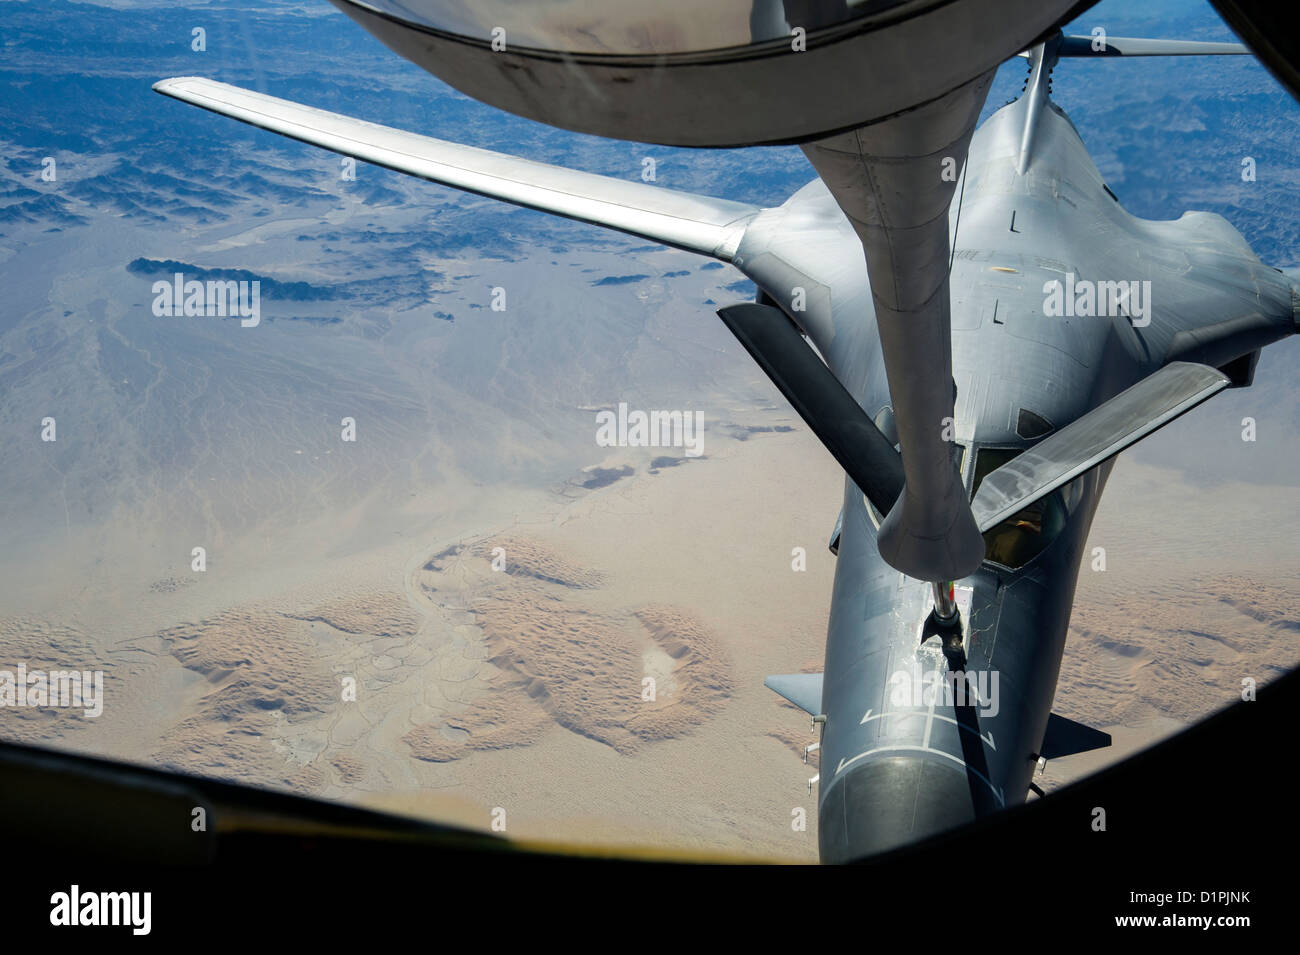 A 340th Expeditionary Air Refueling Squadron KC-135 Stratotanker refuels a B-1B Lancer over Afghanistan, Dec. 22. The B-1B, deployed from Ellsworth Air Force Base, S.D., flew 26 U.S. flags over Afghanistan for the Sandy Hook Elementary School shooting in Stock Photo